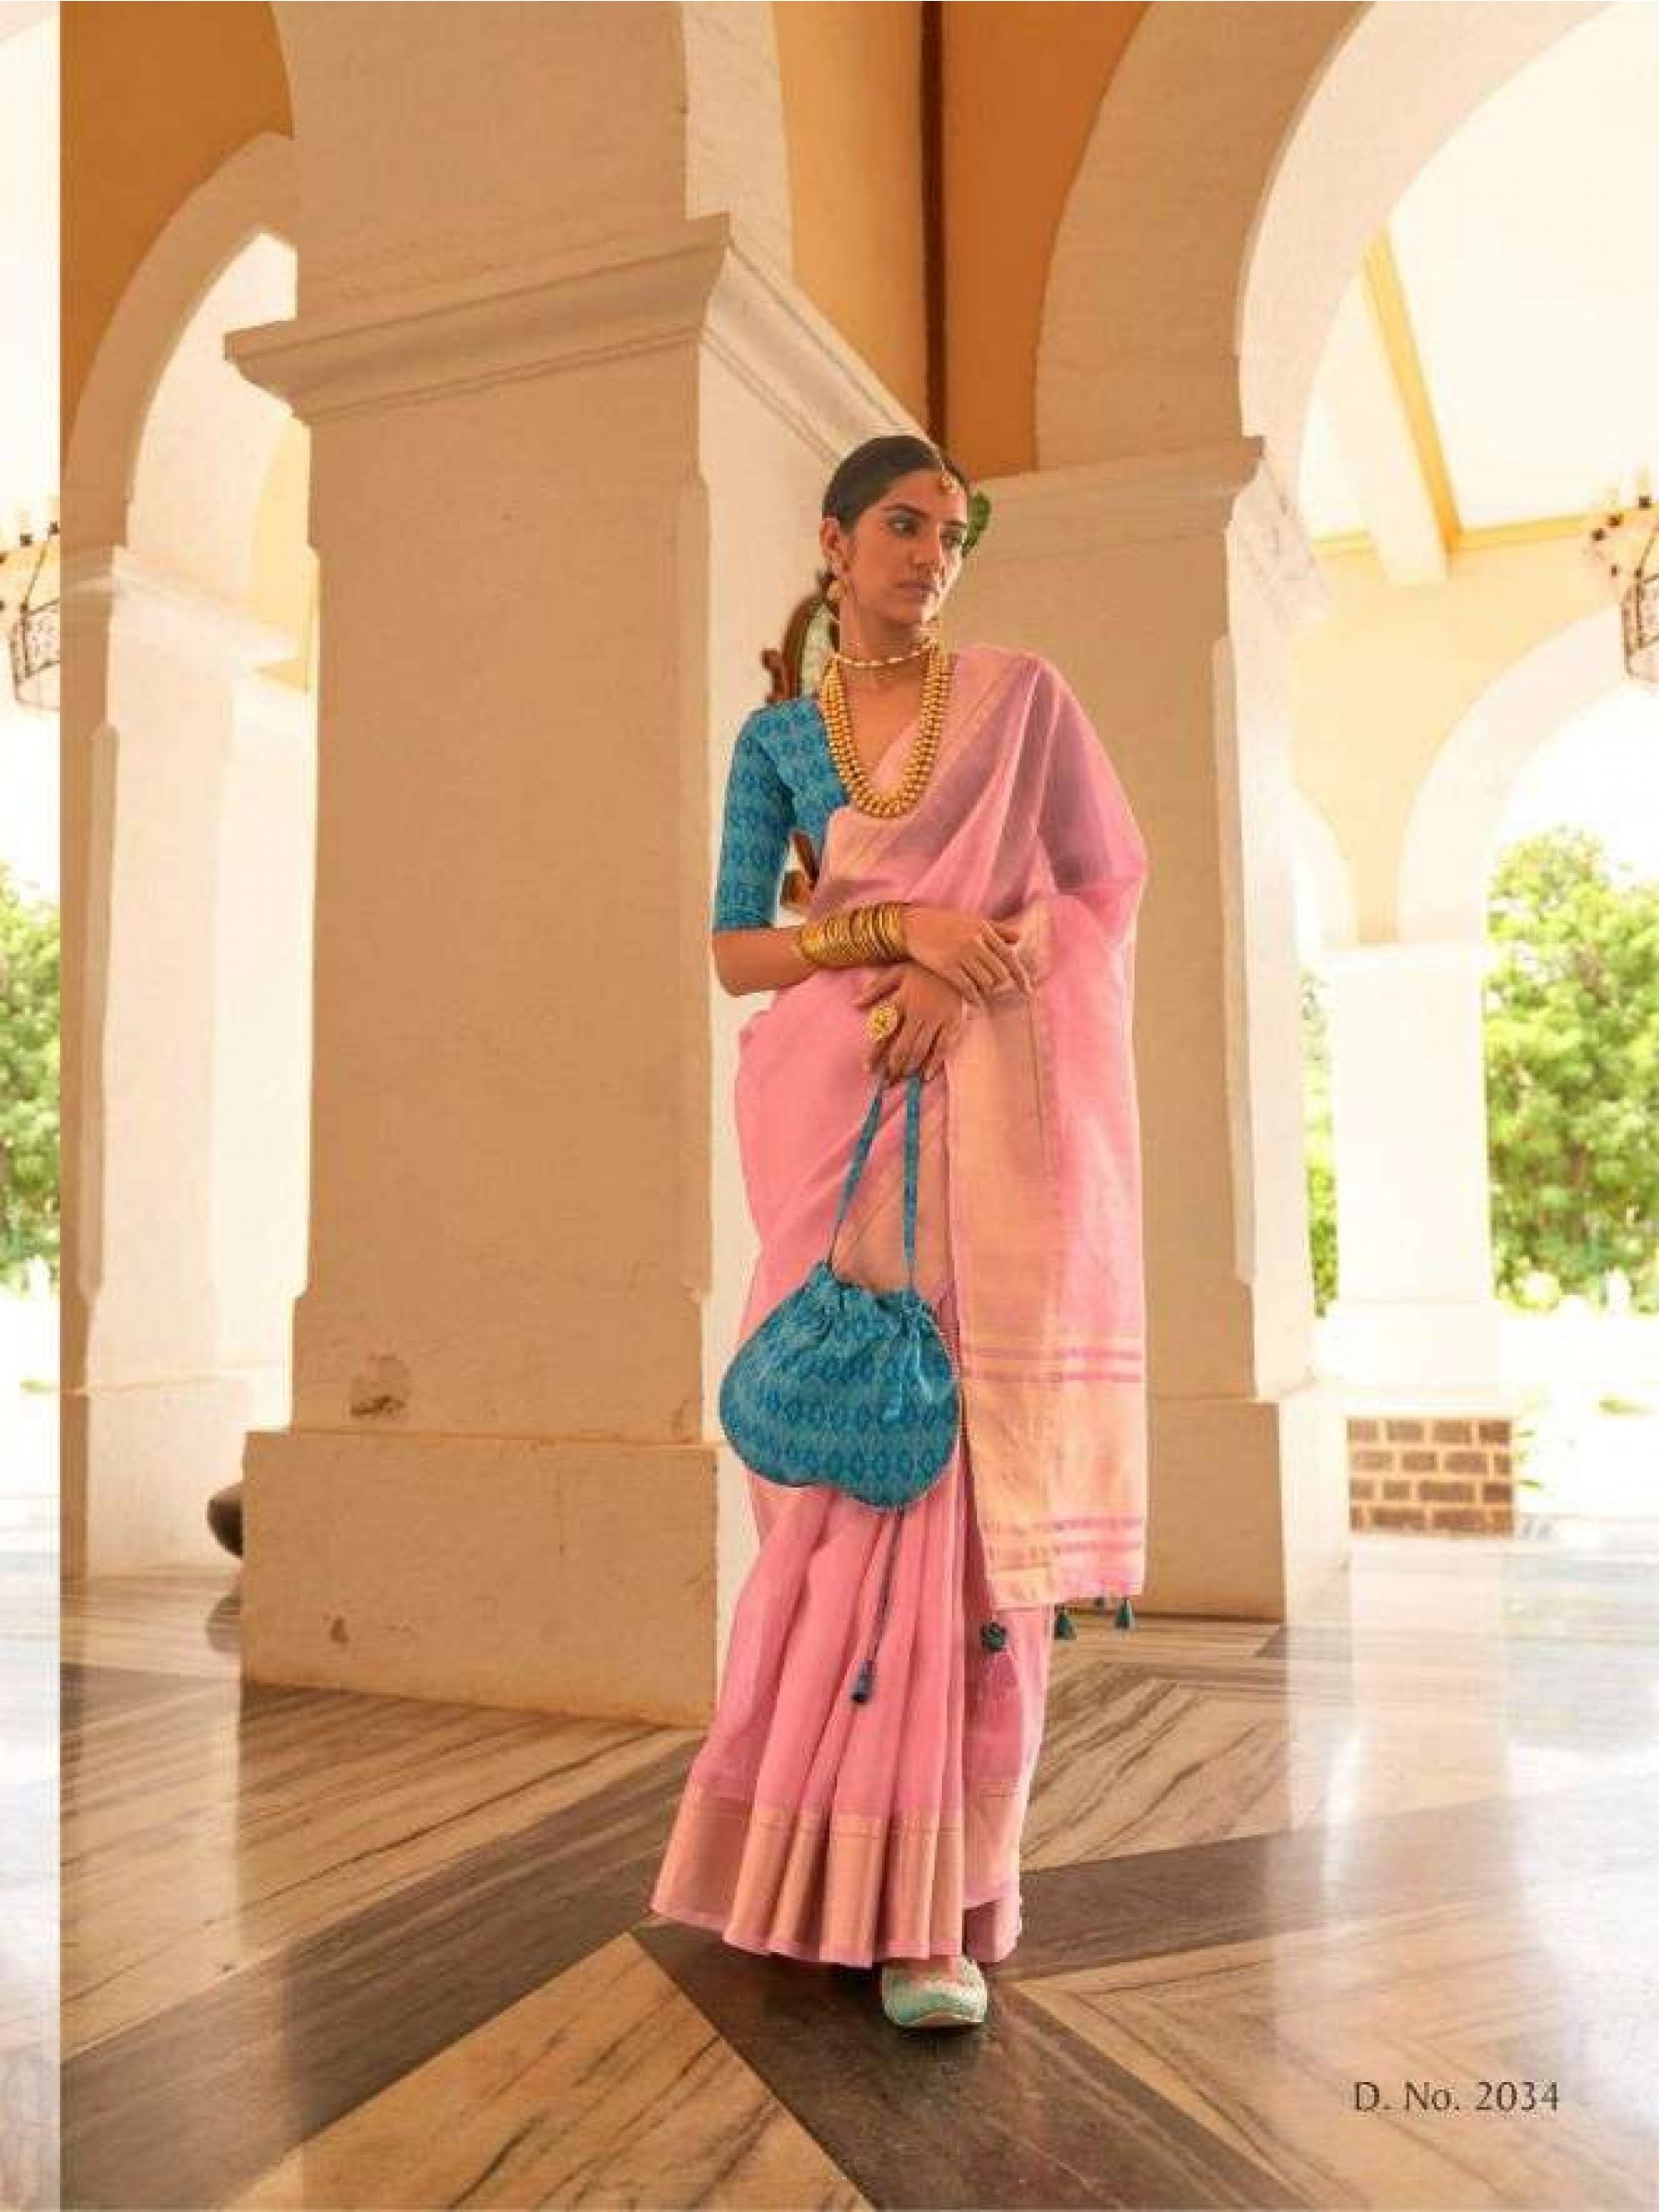 Organza Saree In Pink Color With Embroidery Work